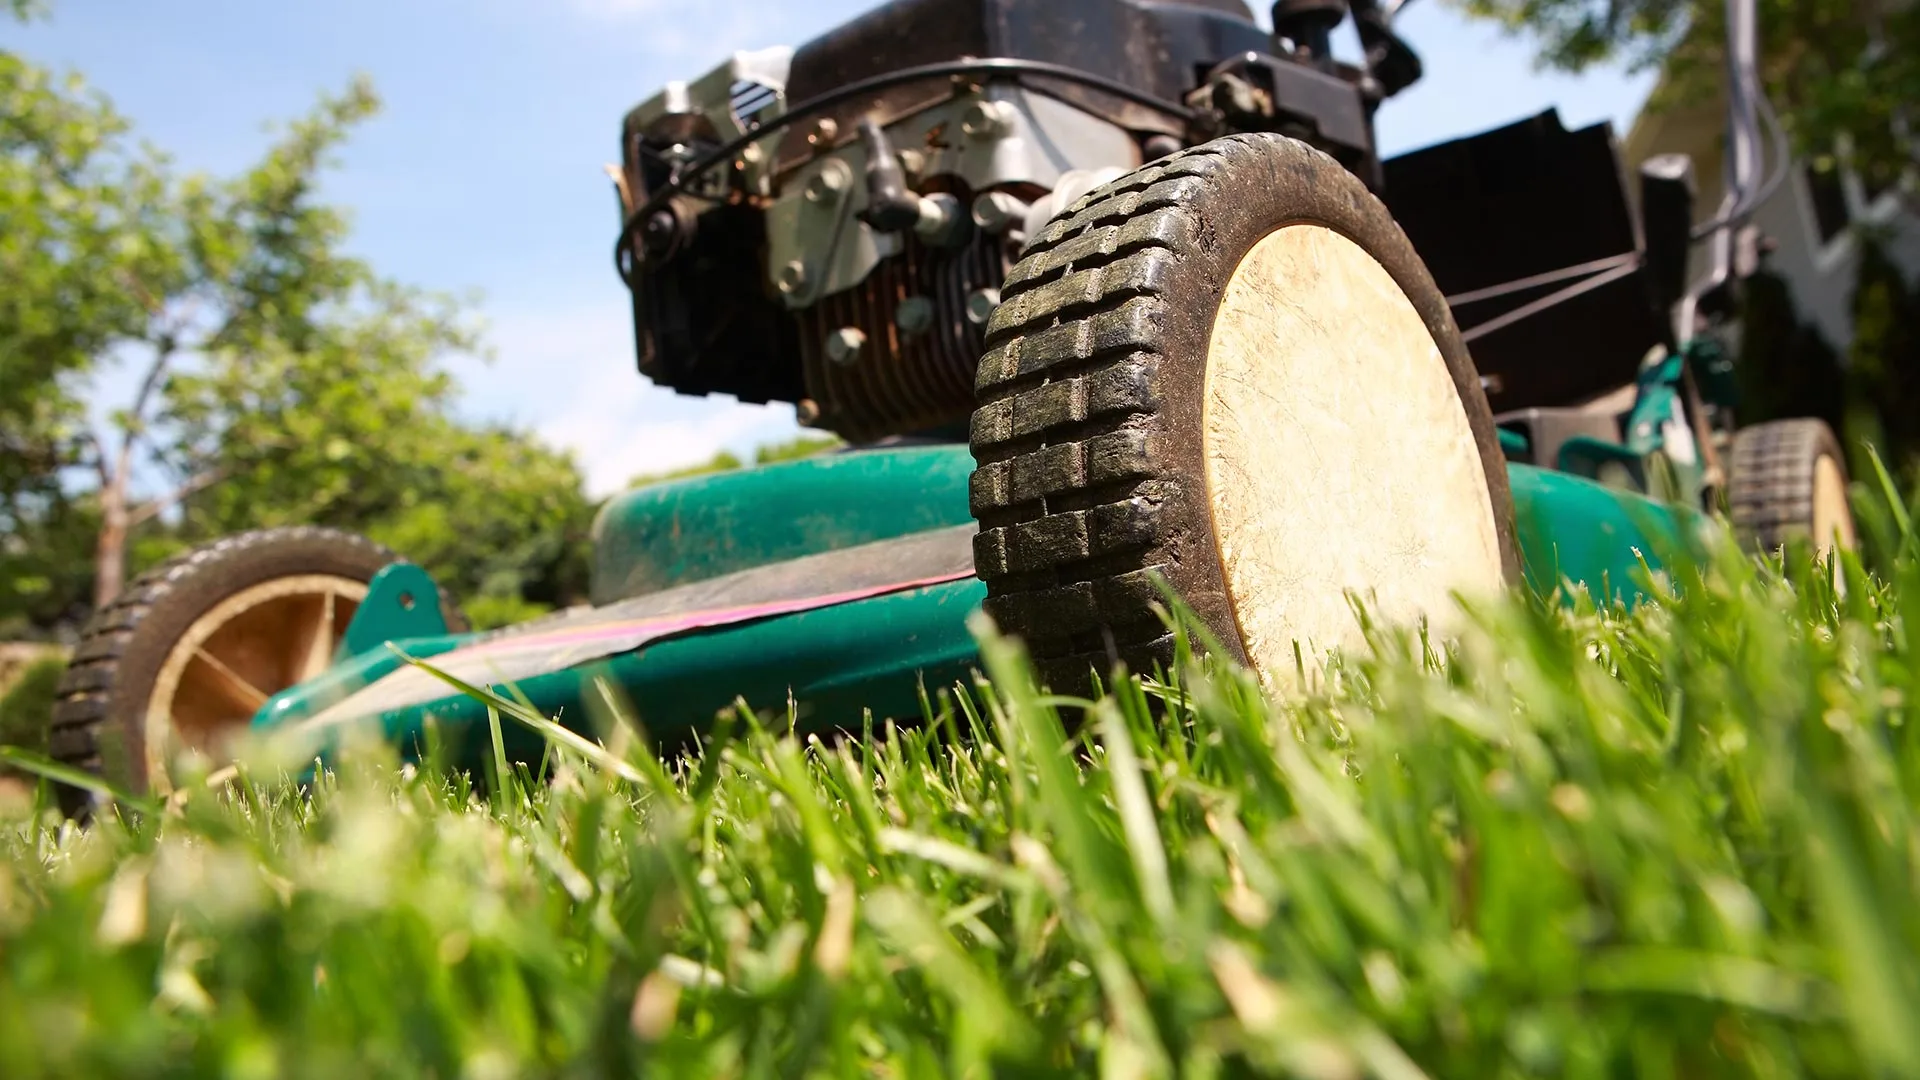 Follow These 3 Rules When Mowing Your Sod for the First Time